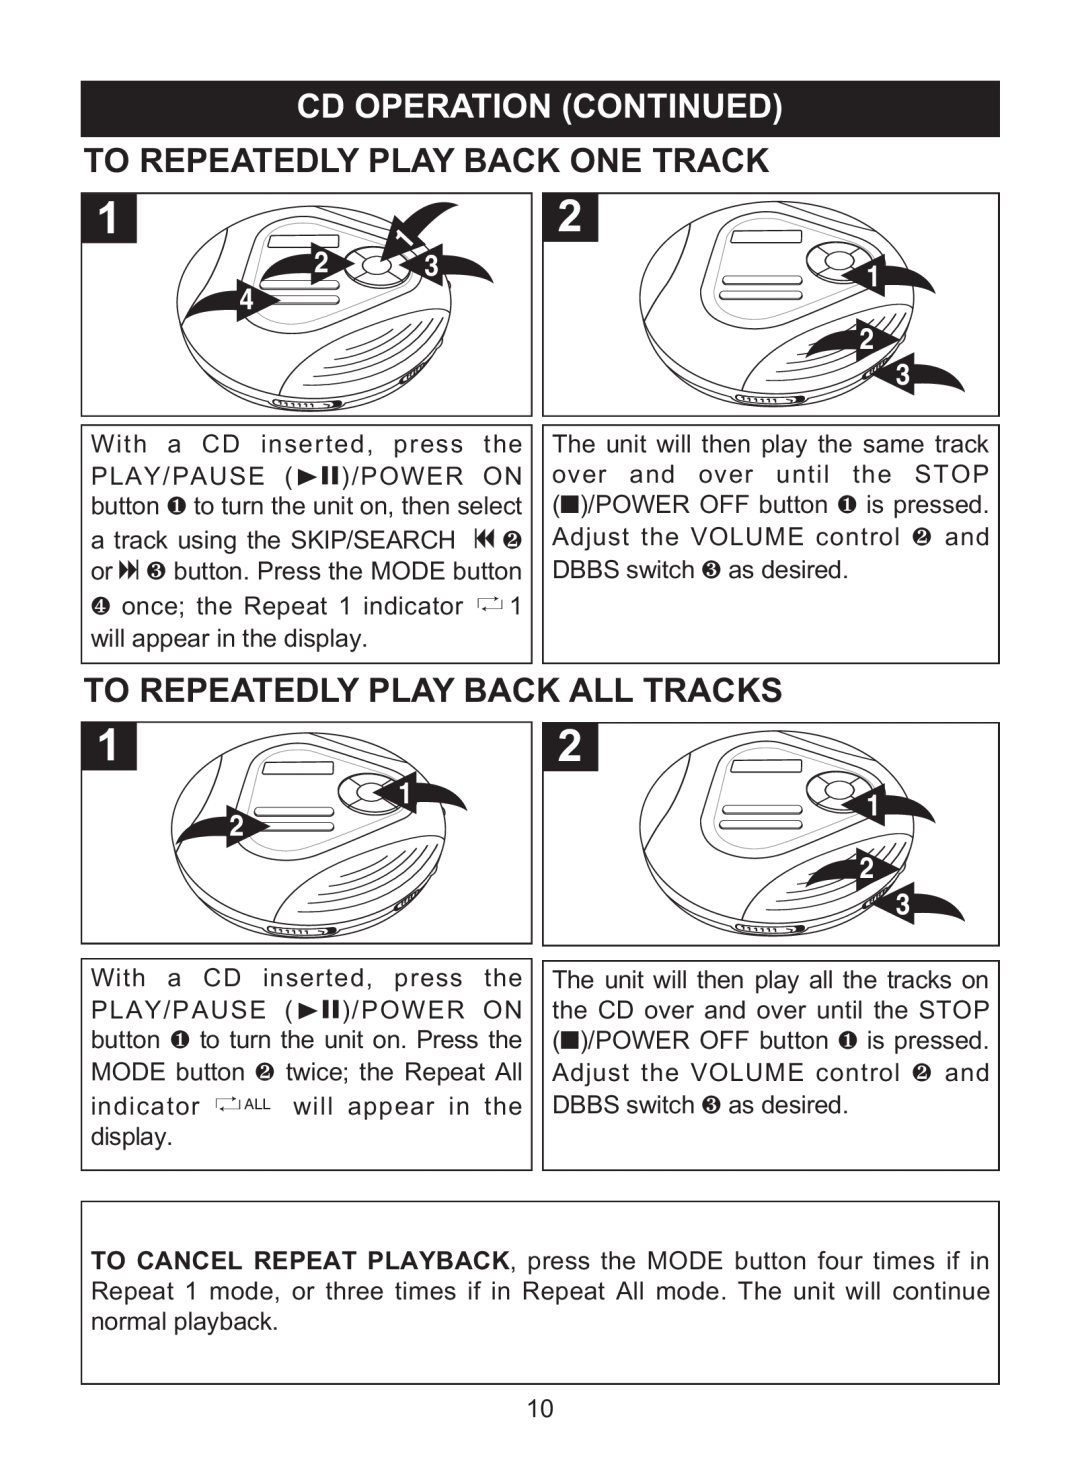 Memorex MD6460 manual To Repeatedly Play Back All Tracks, To Repeatedly Play Back One Track, Cd Operation Continued 